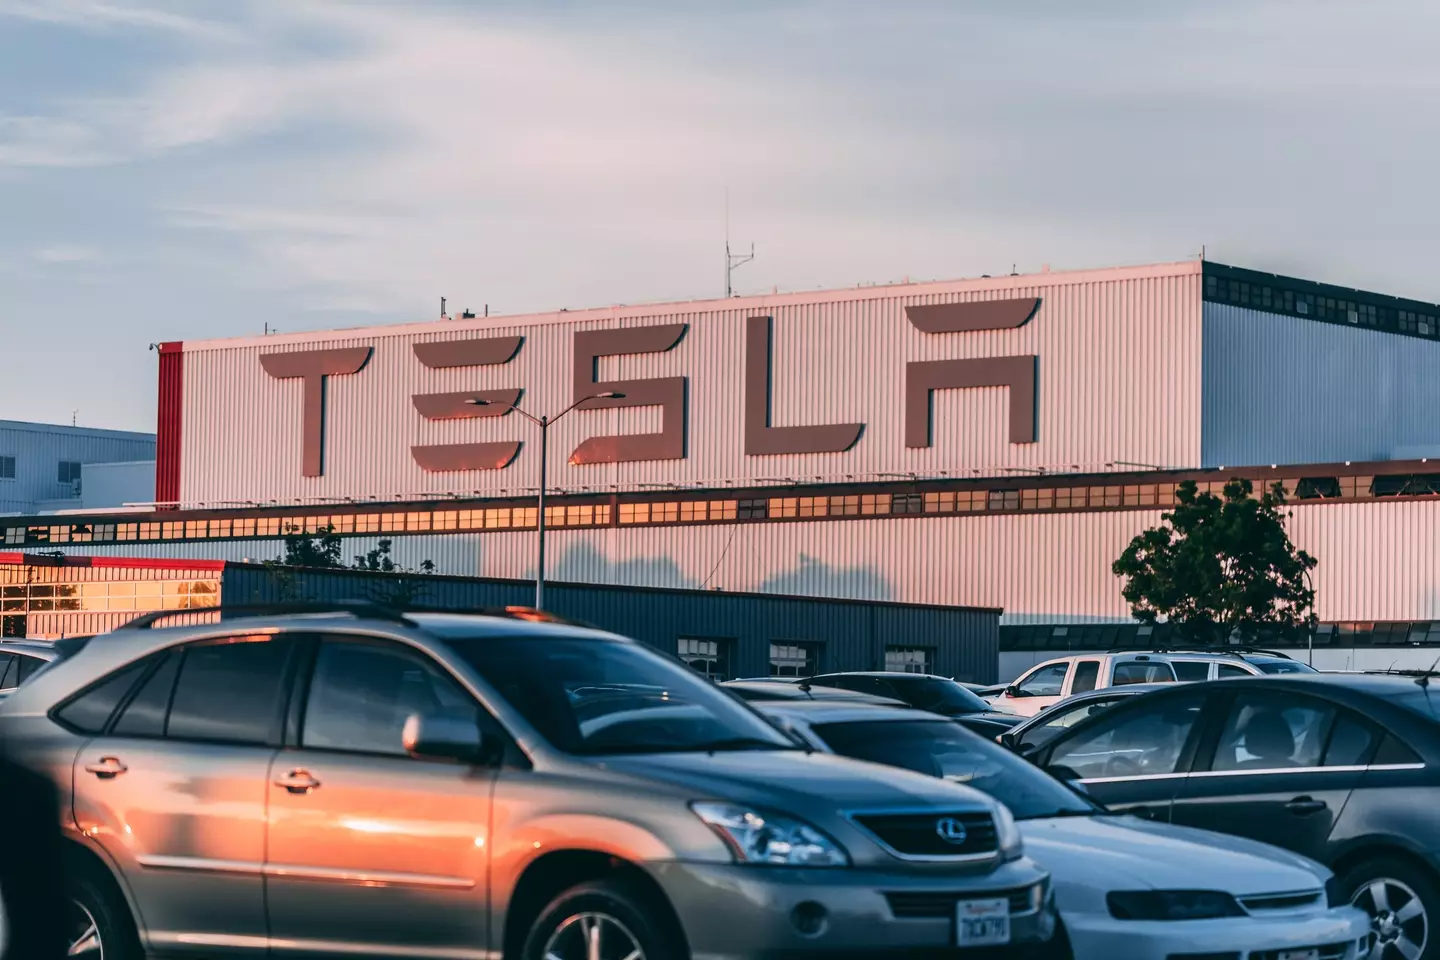 Medlock explained what it felt like to work at Tesla, where he worked for four years.